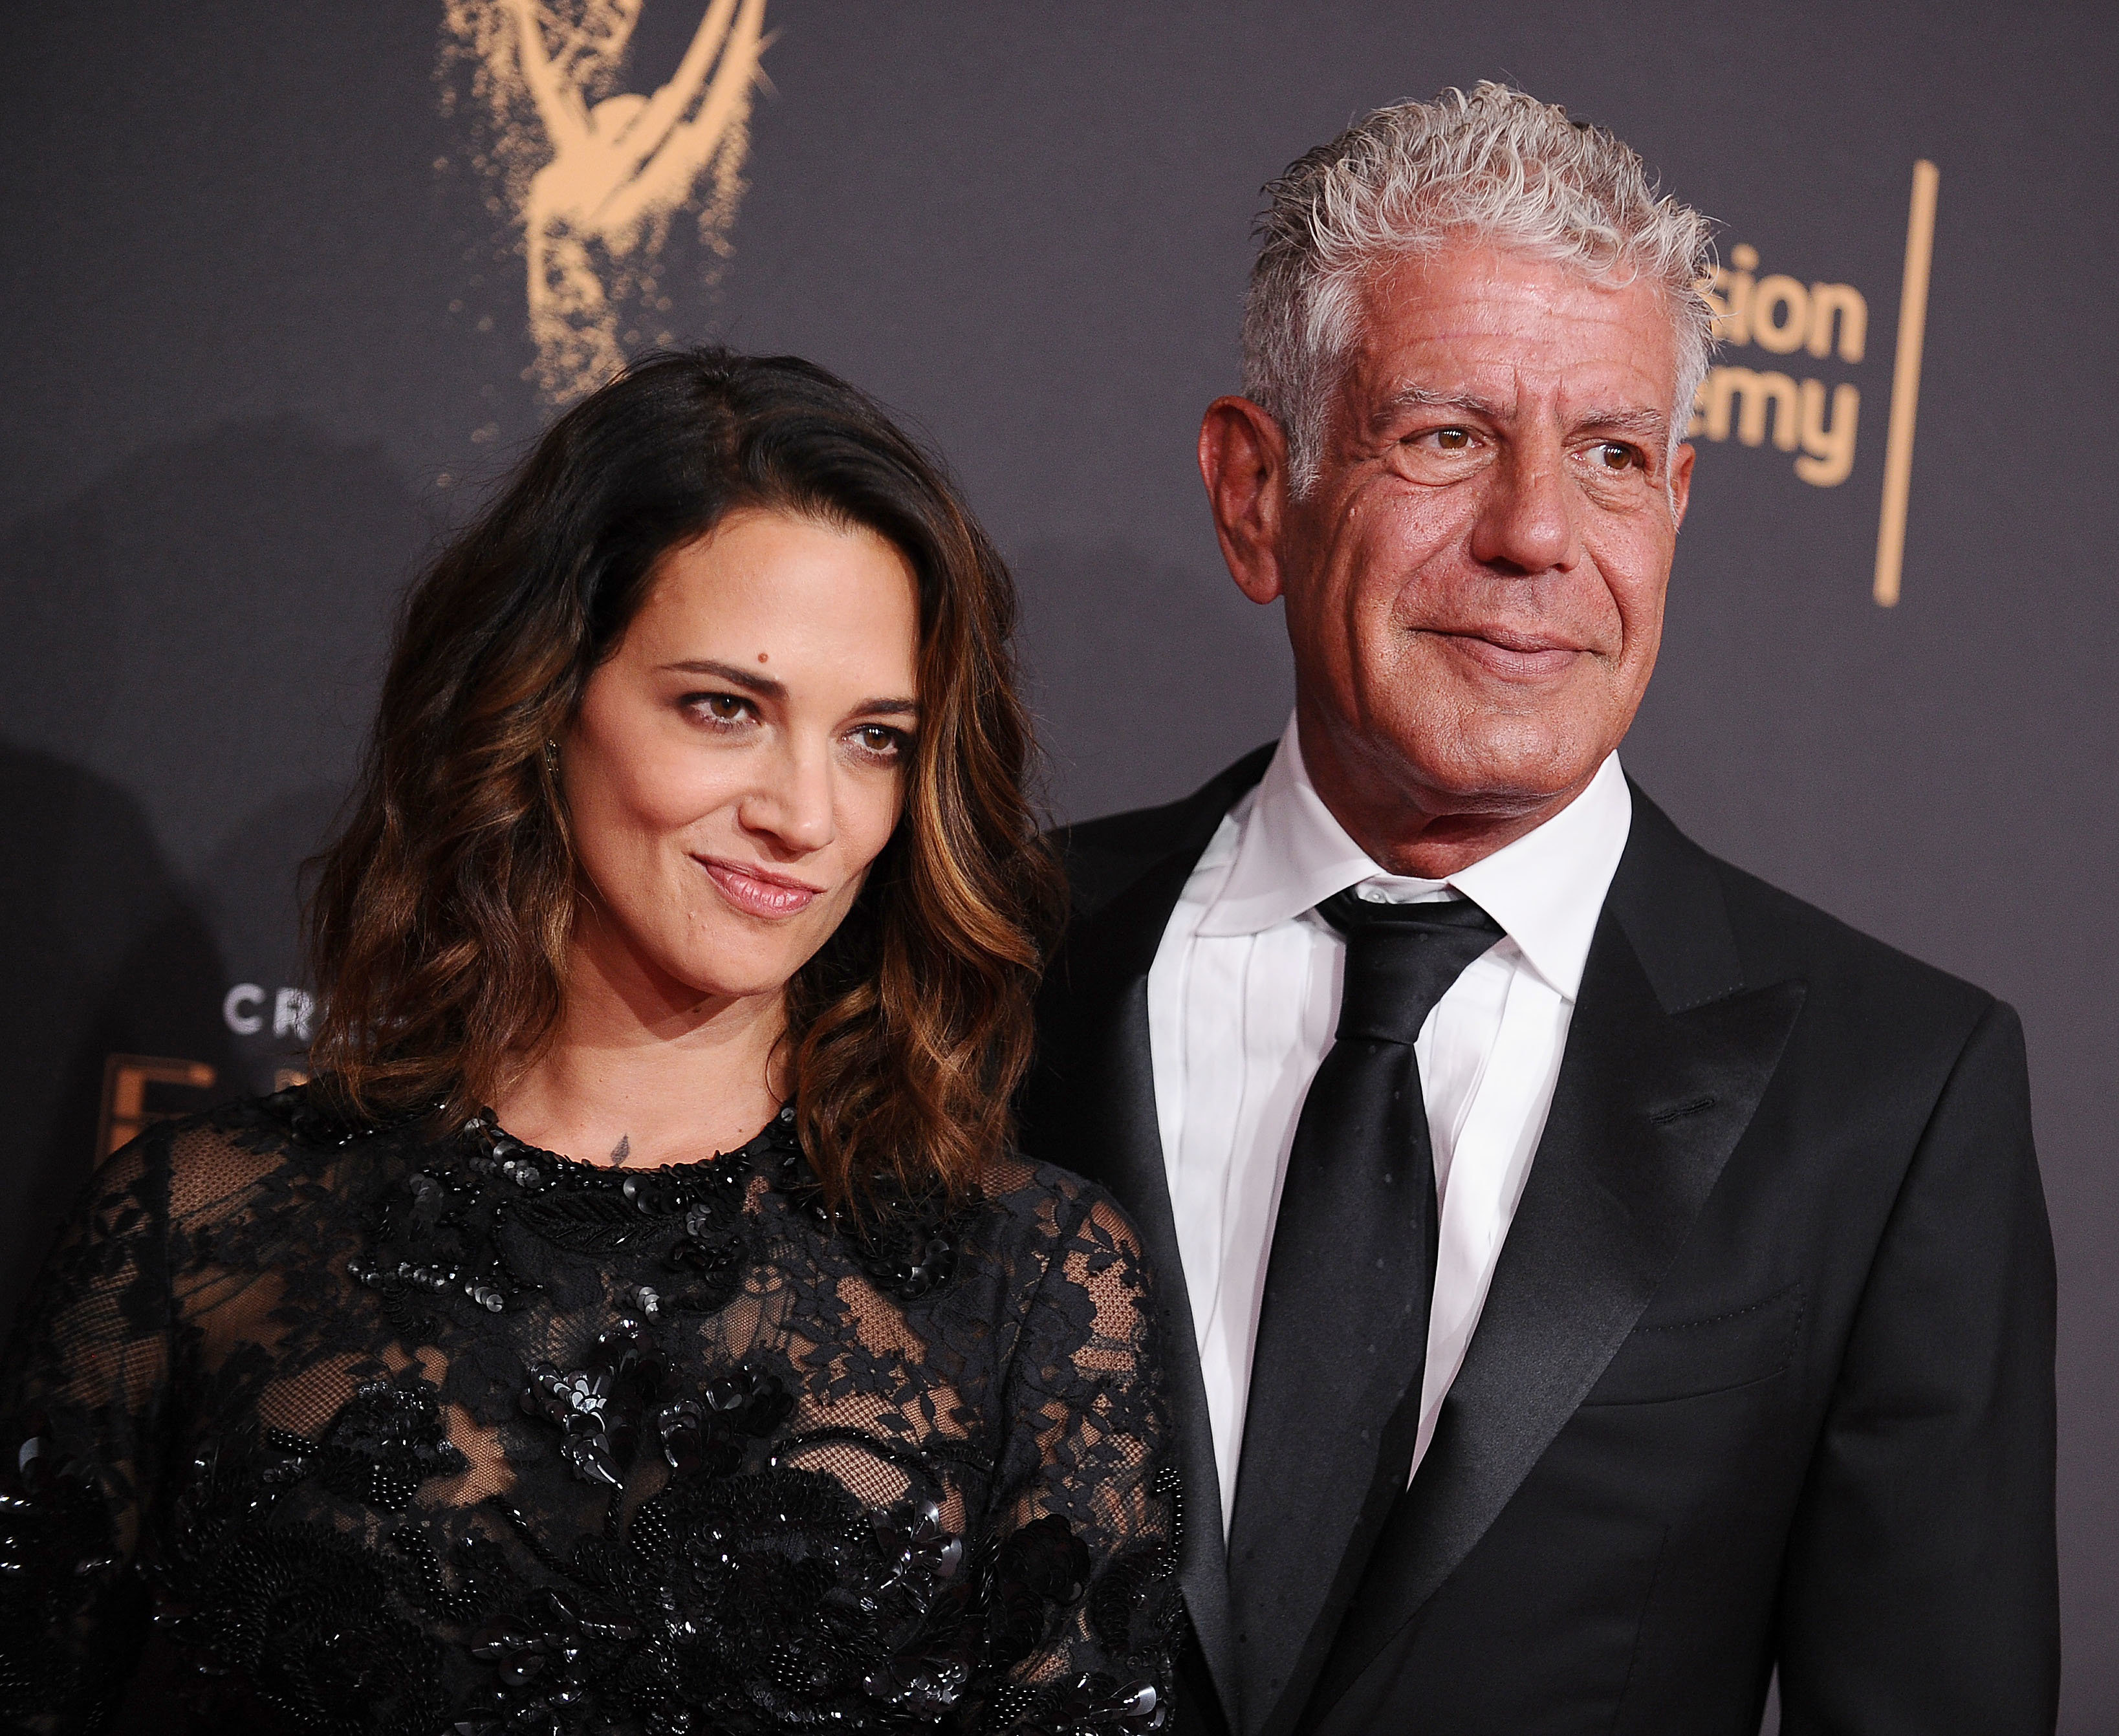 Anthony Bourdain Slams Weinstein In Support Of Girlfriend Asia Argento HuffPost Entertainment Sex Image Hq